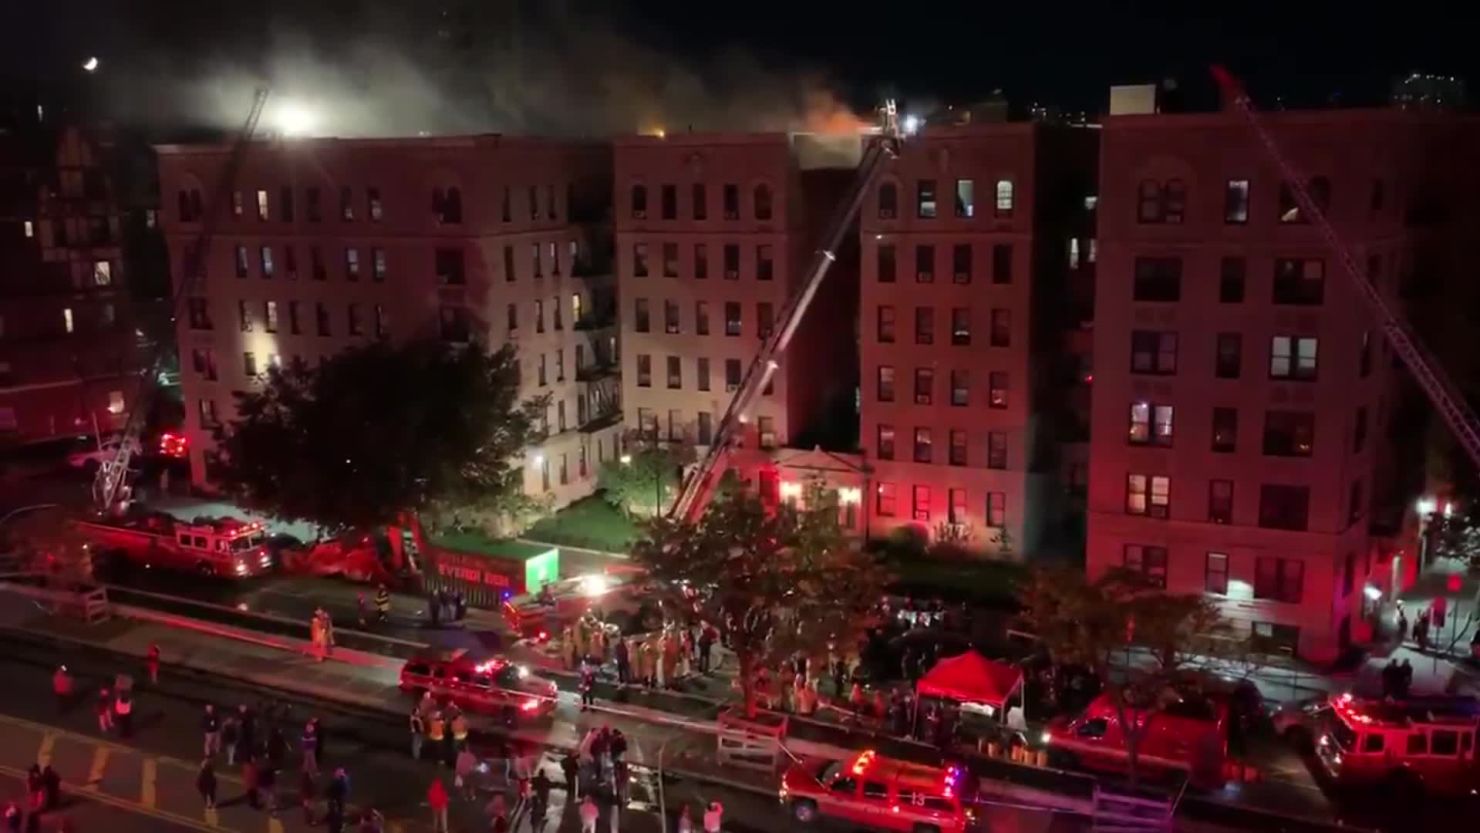 More than 200 firefighters responded Friday night, the New York City Fire Department said.